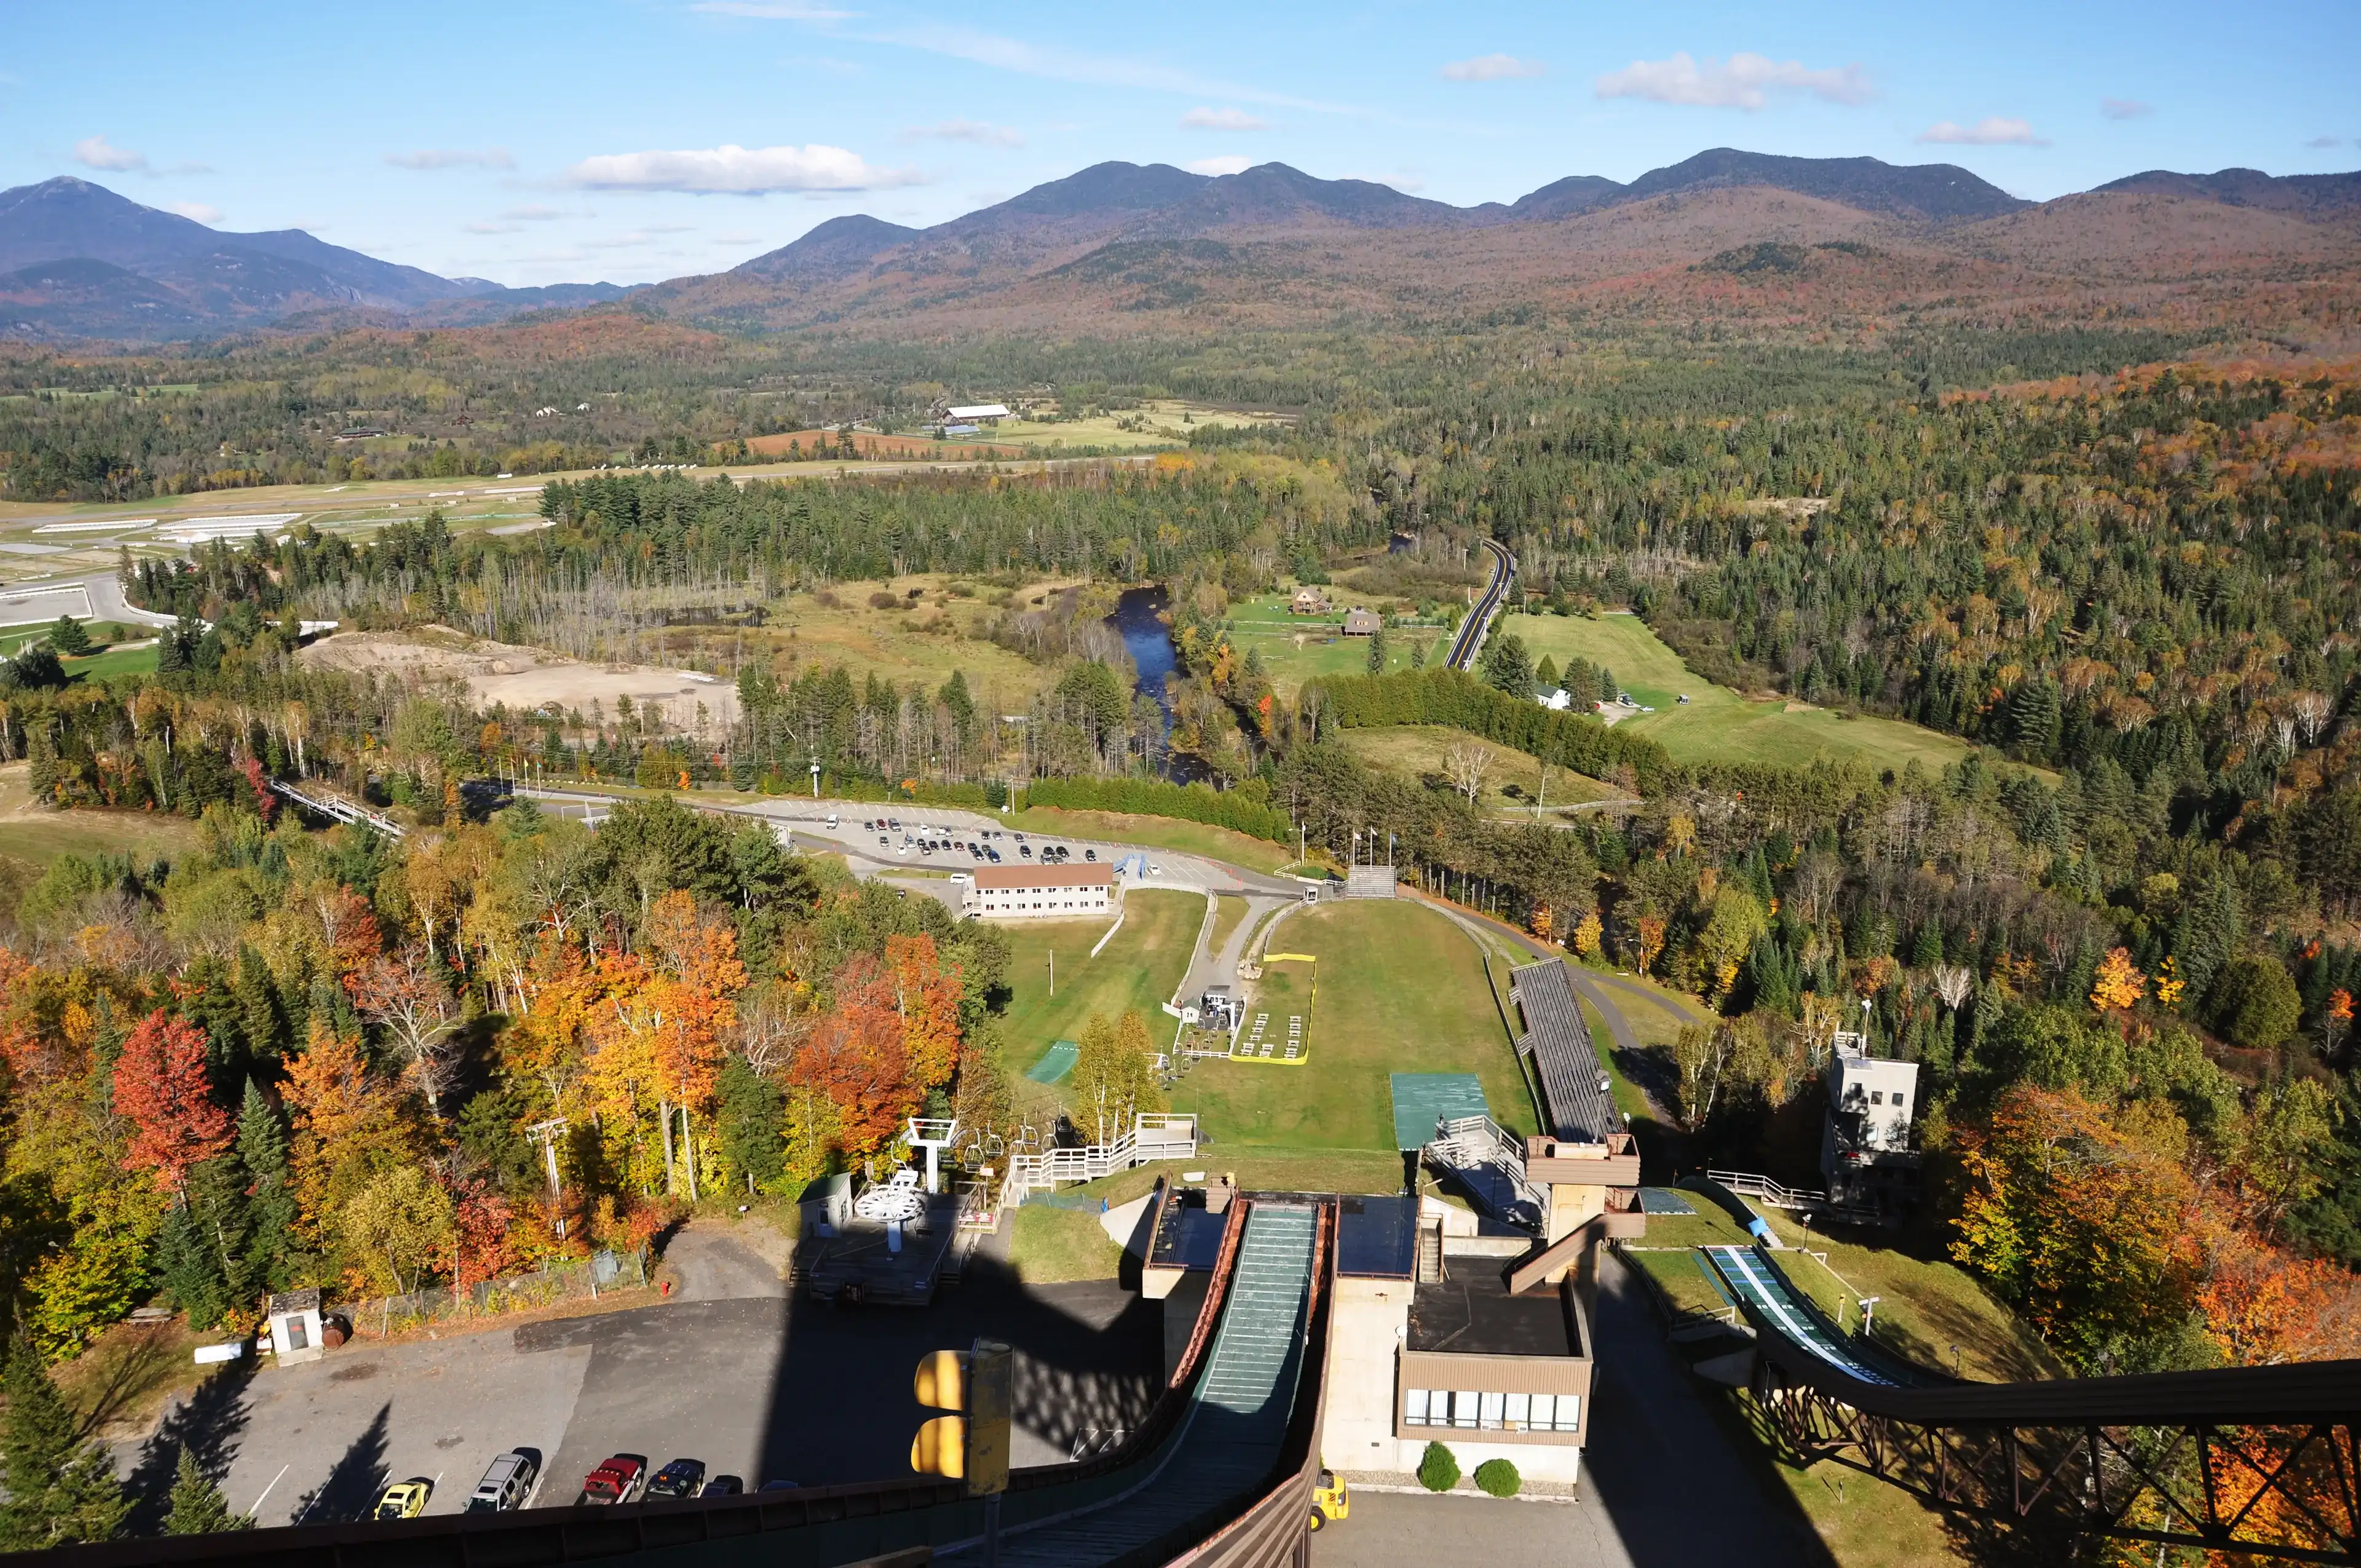 Best Lake Placid hotels. Cheap hotels in Lake Placid, New York, United States